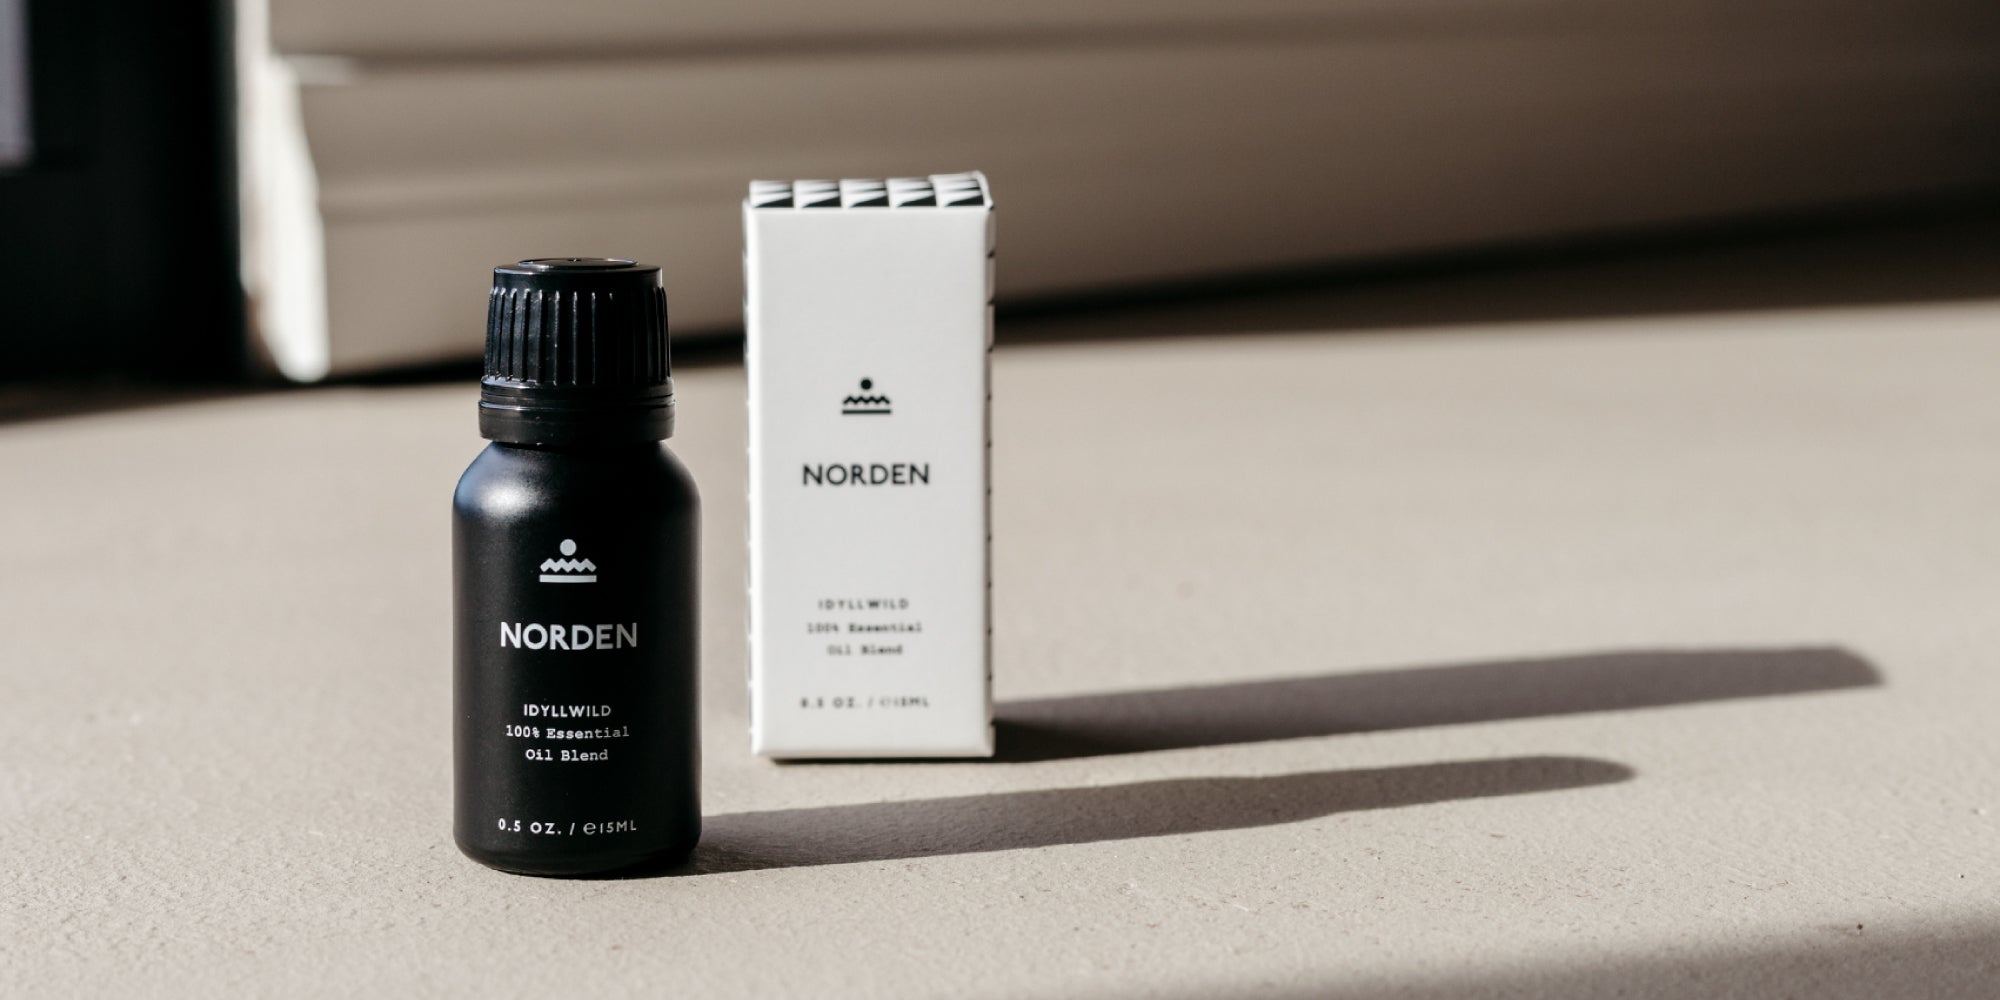 The Norden Guide to Essential Oils